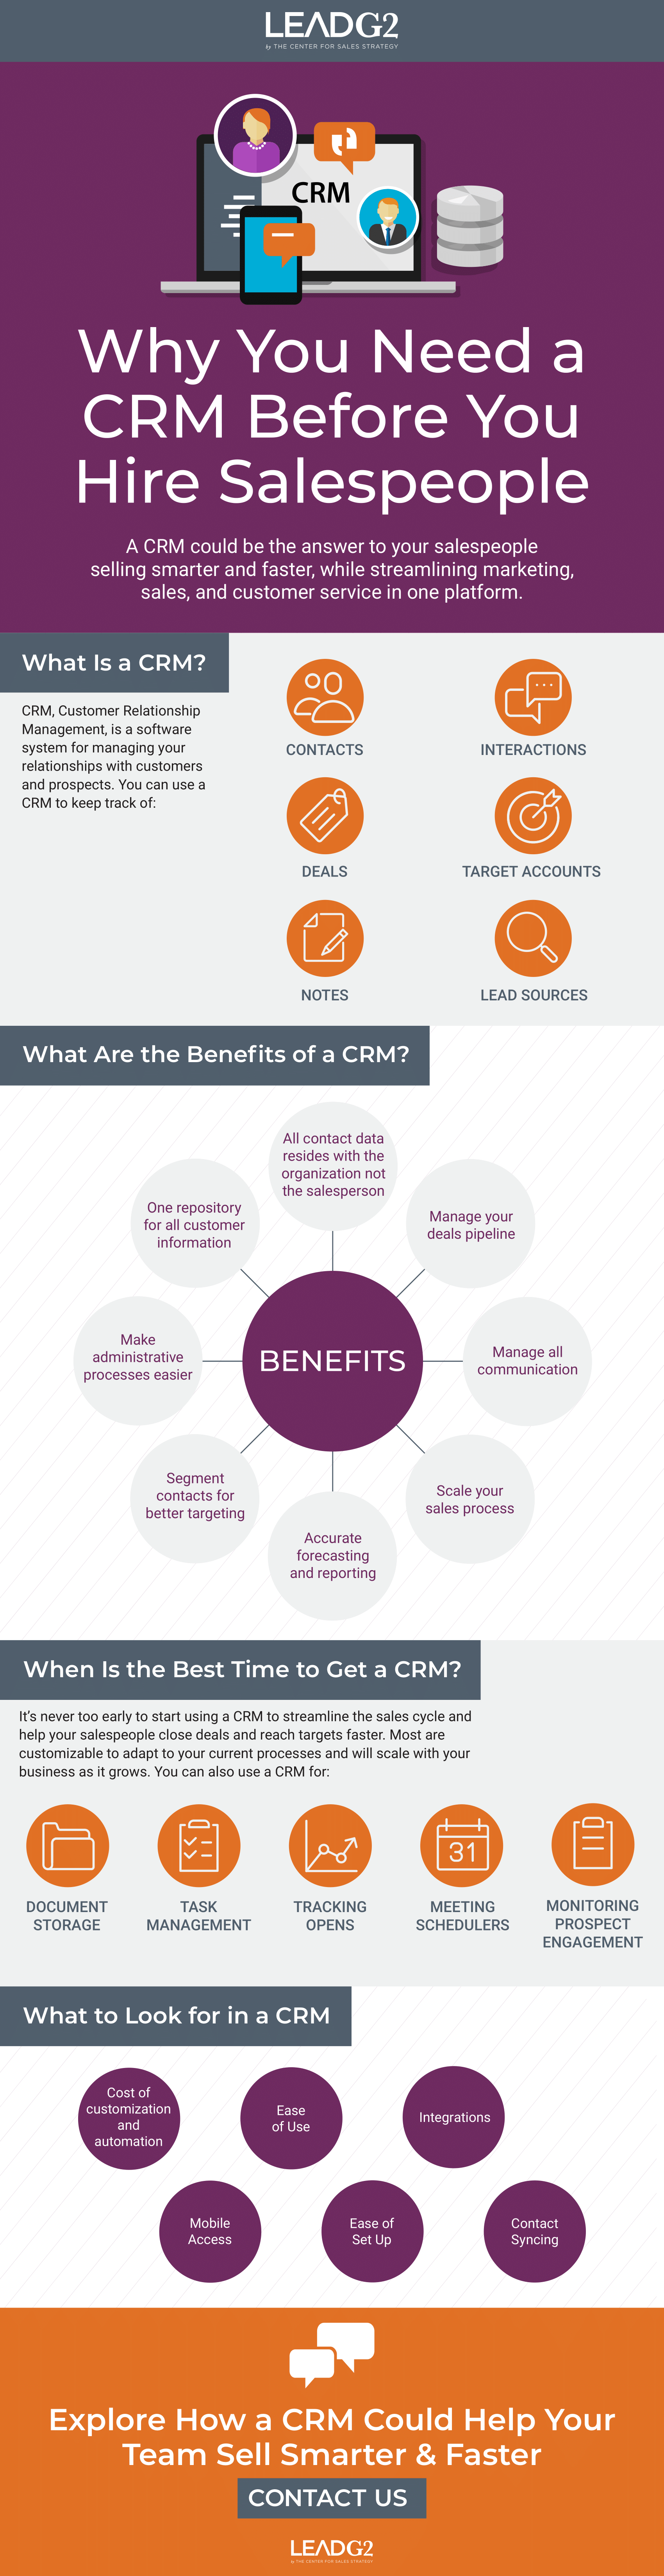 LG2-Infographic-Why You Need a CRM_FINAL-1